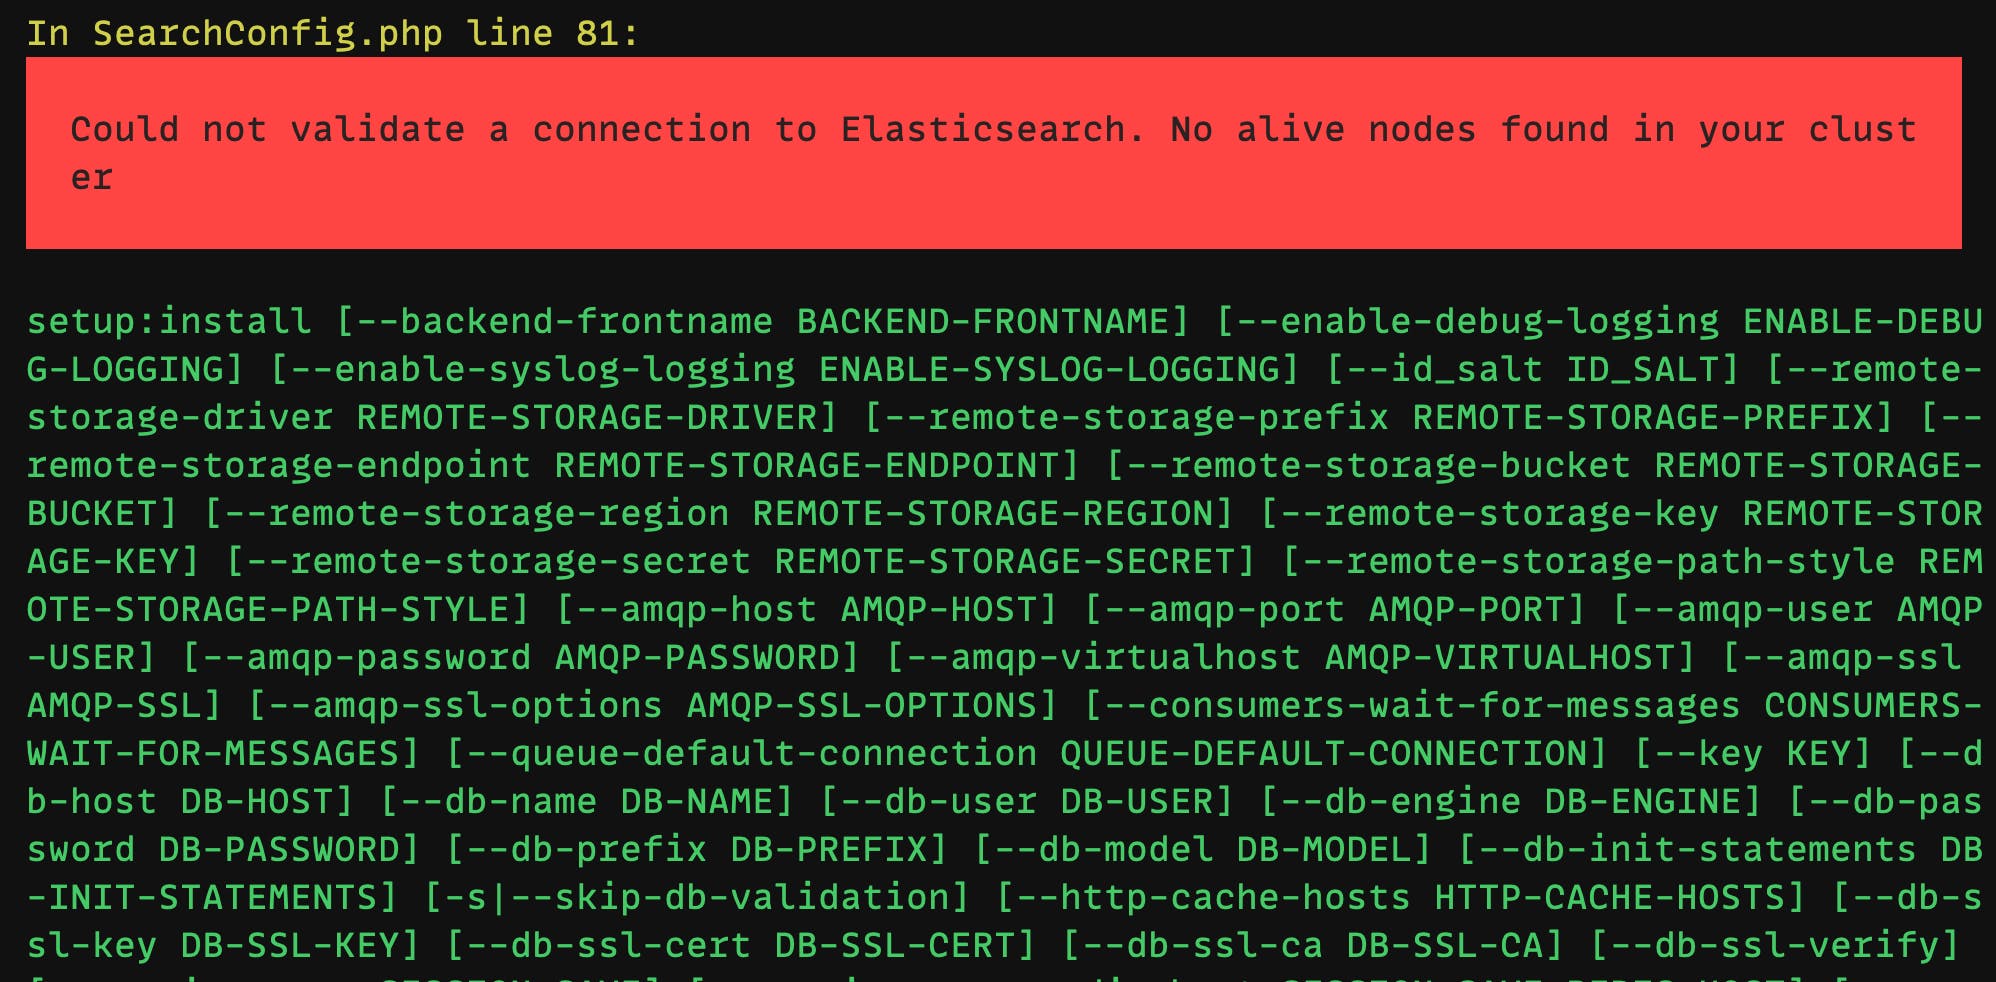 Could not validate a connection to Elasticsearch. No alive nodes found in your cluster